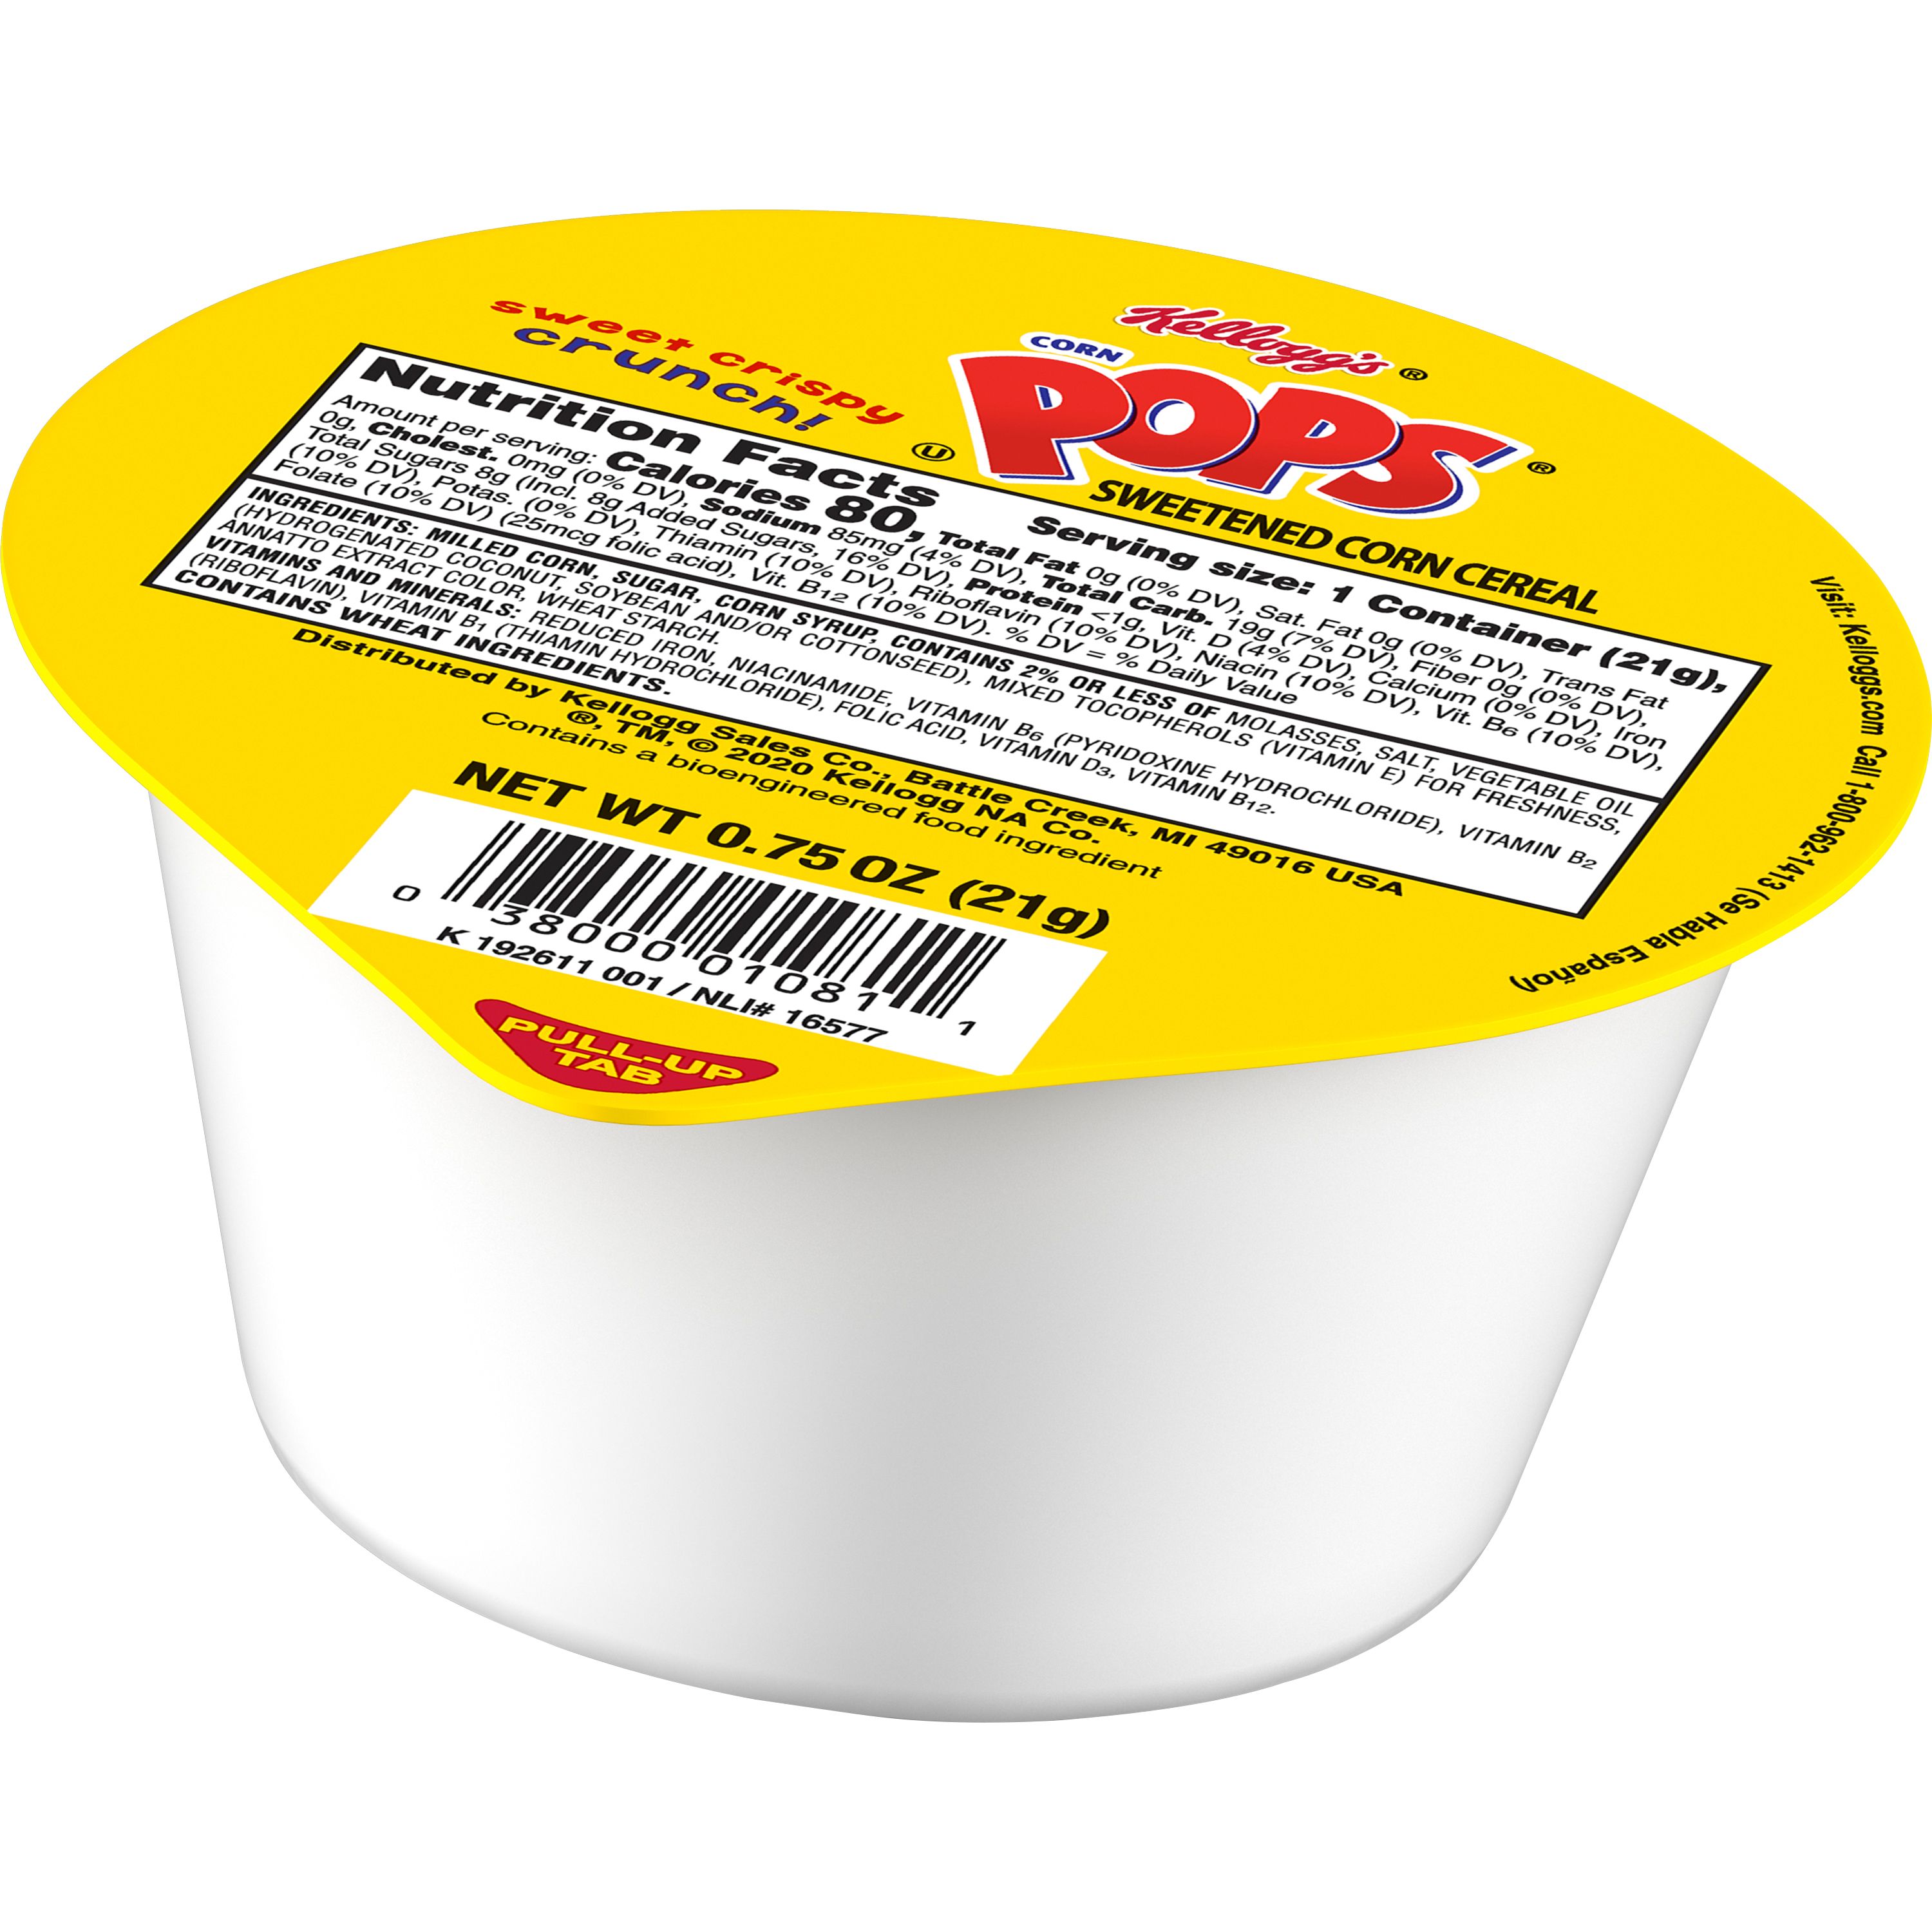  Corn Pops Cold Breakfast Cereal Cups, 8 Vitamins and